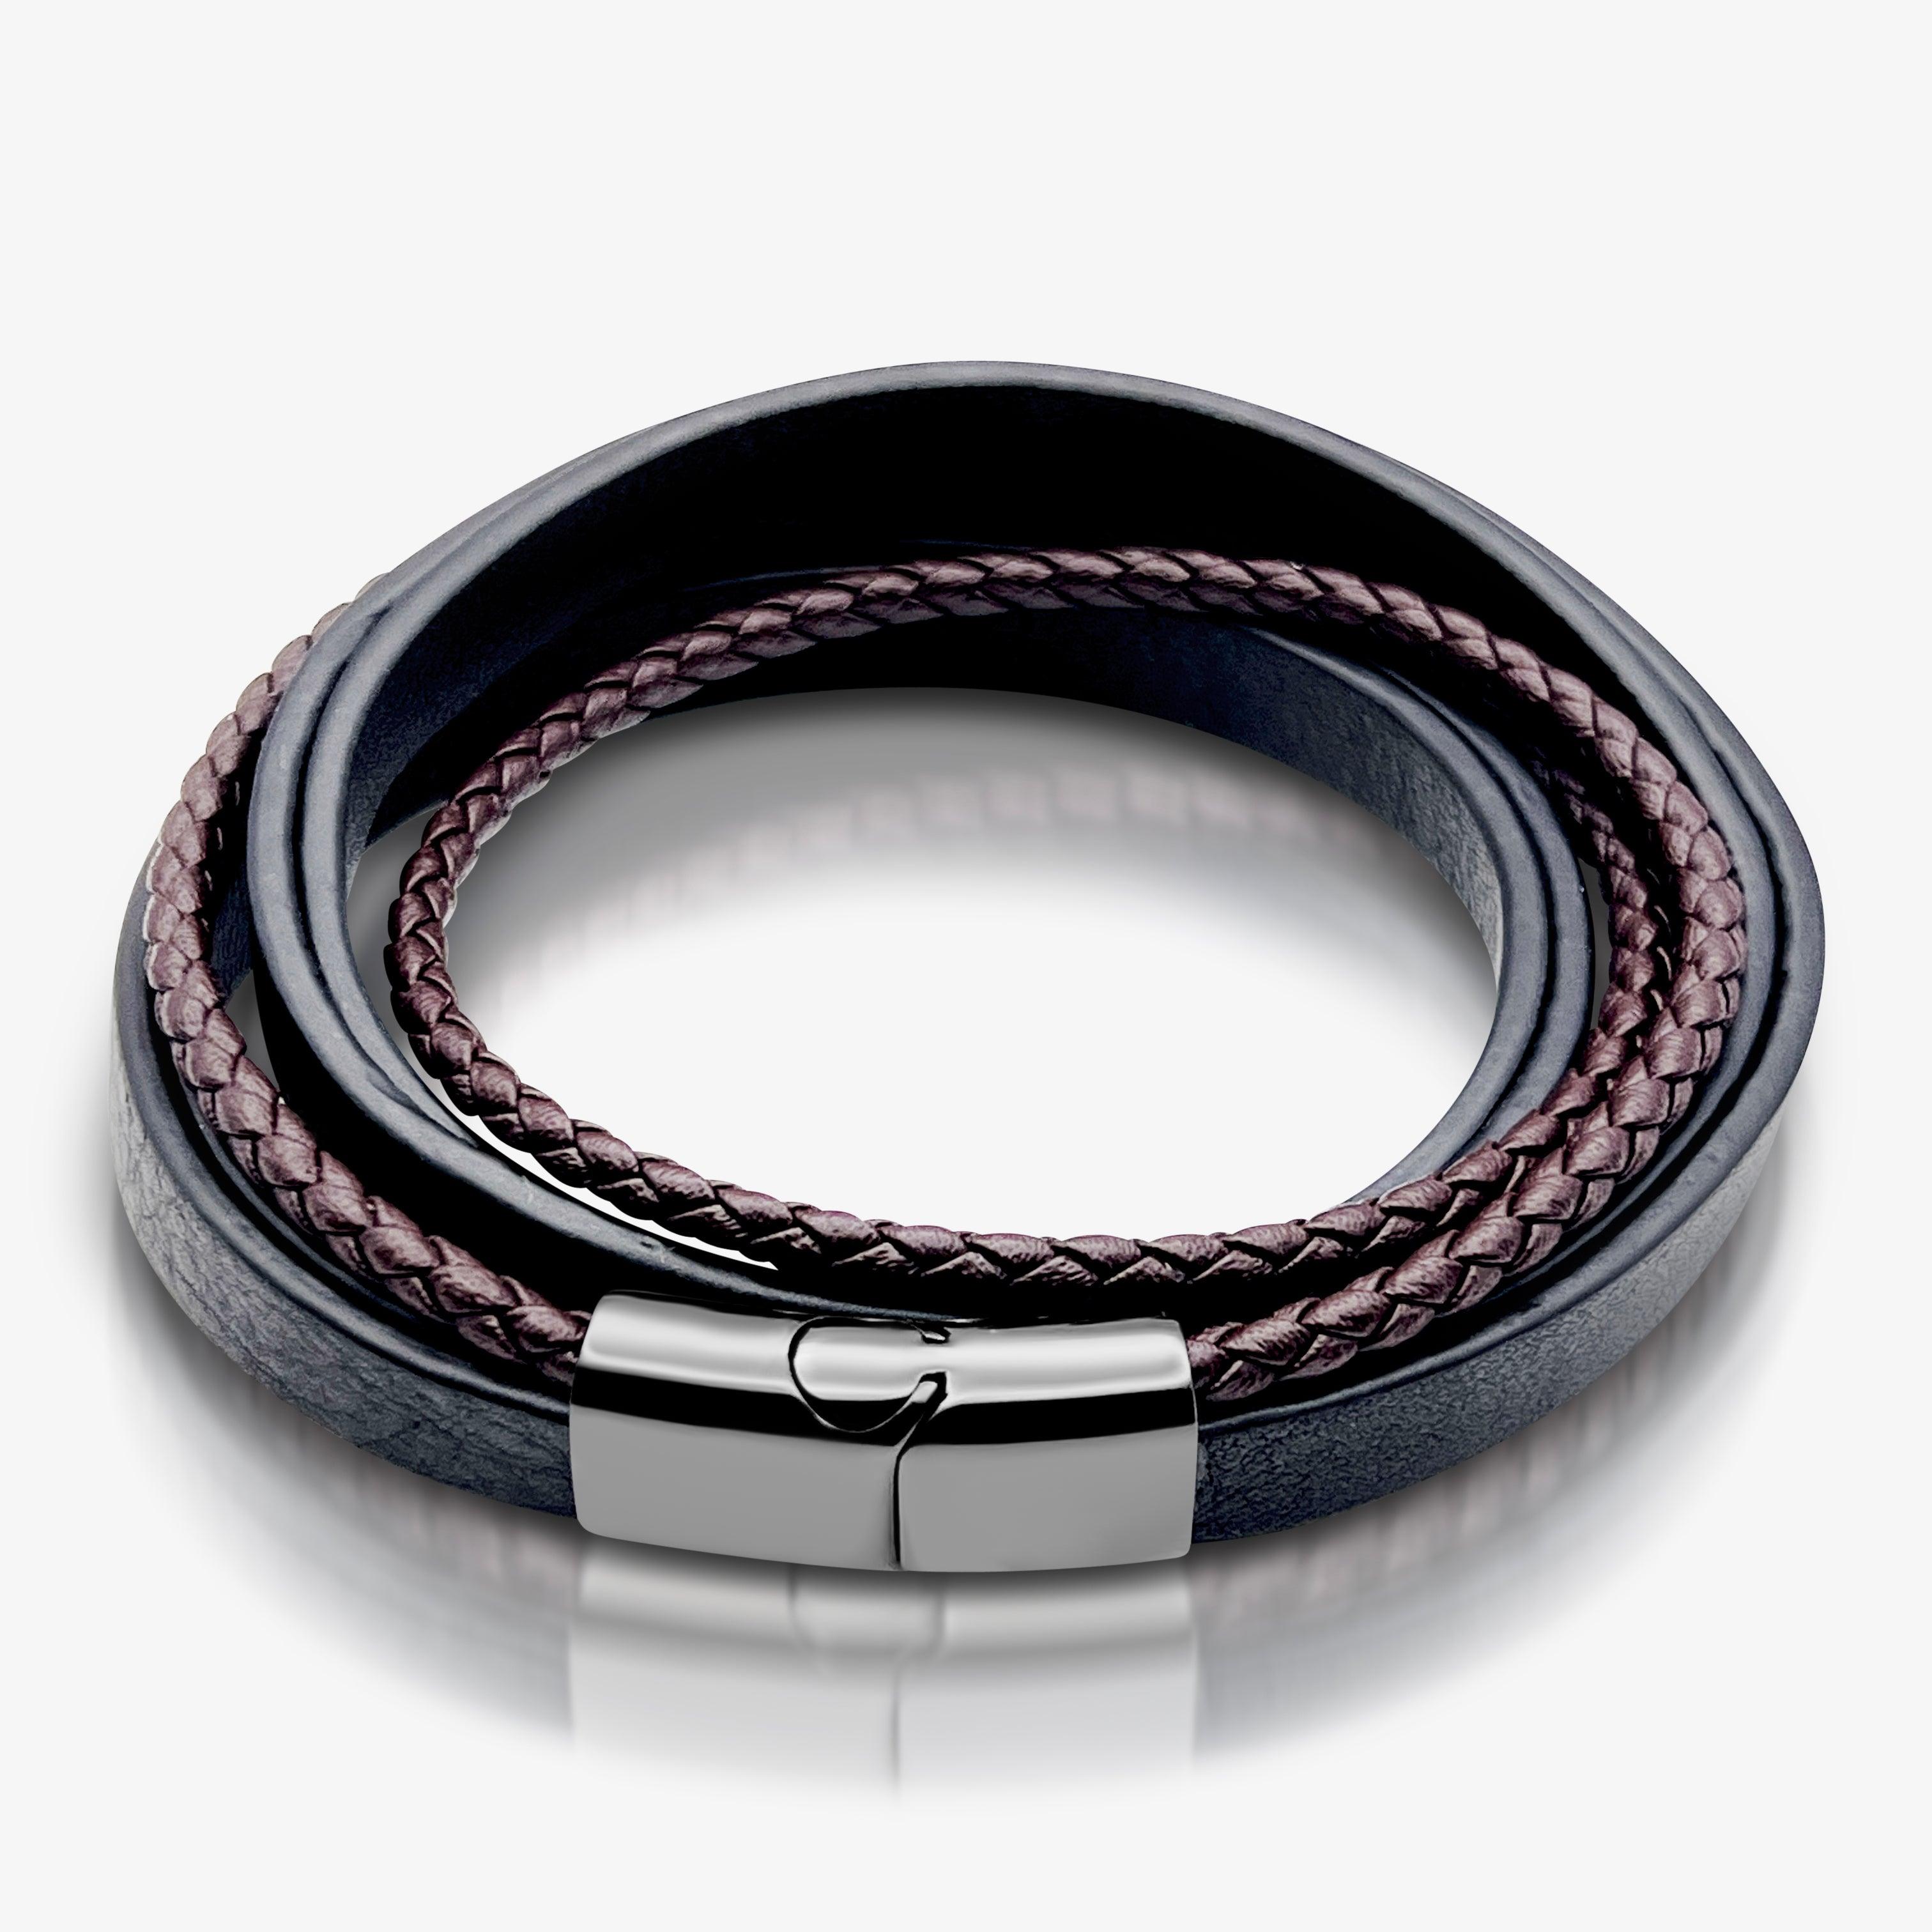 Premium Stainless Steel Italian Leather Braided Two-Tone Layer Bracelet for Men - TRYNDI